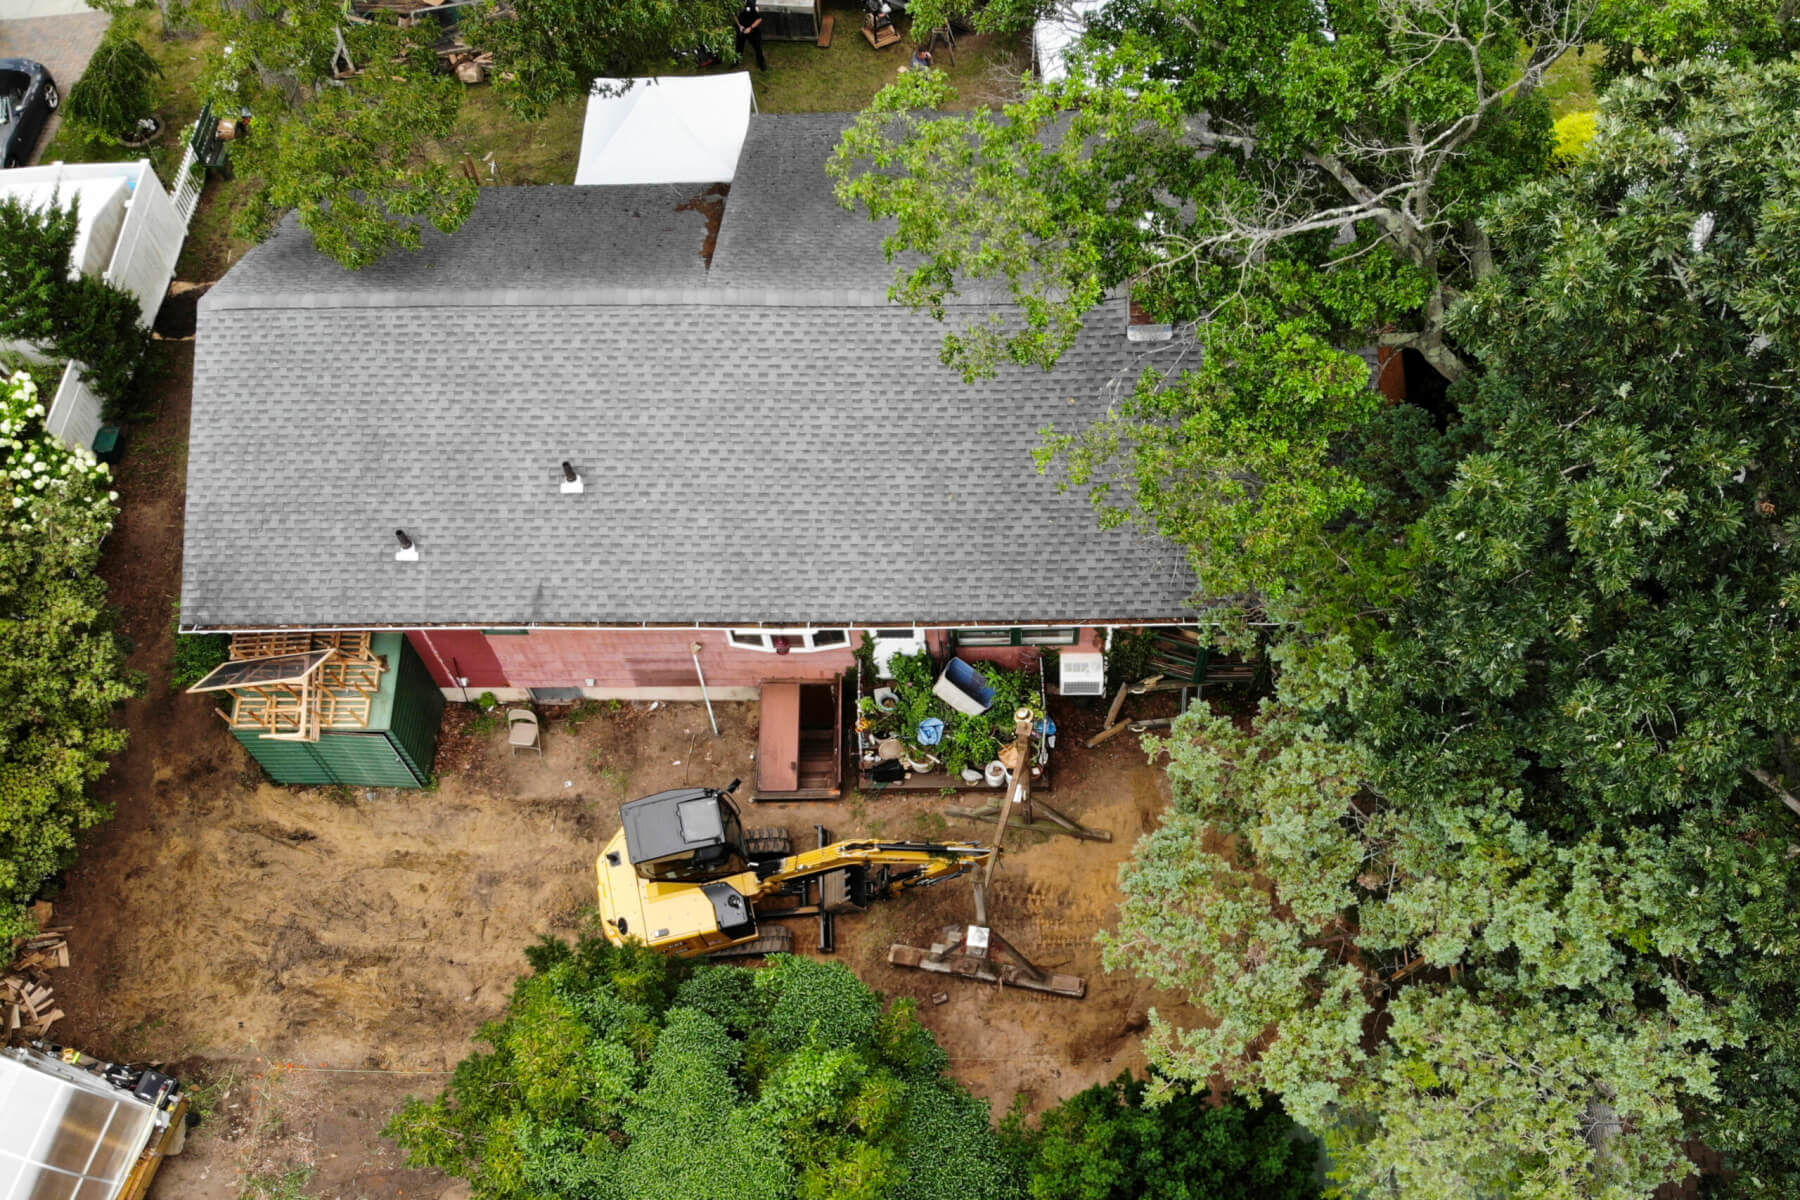 Aerial photo of excavator outside house